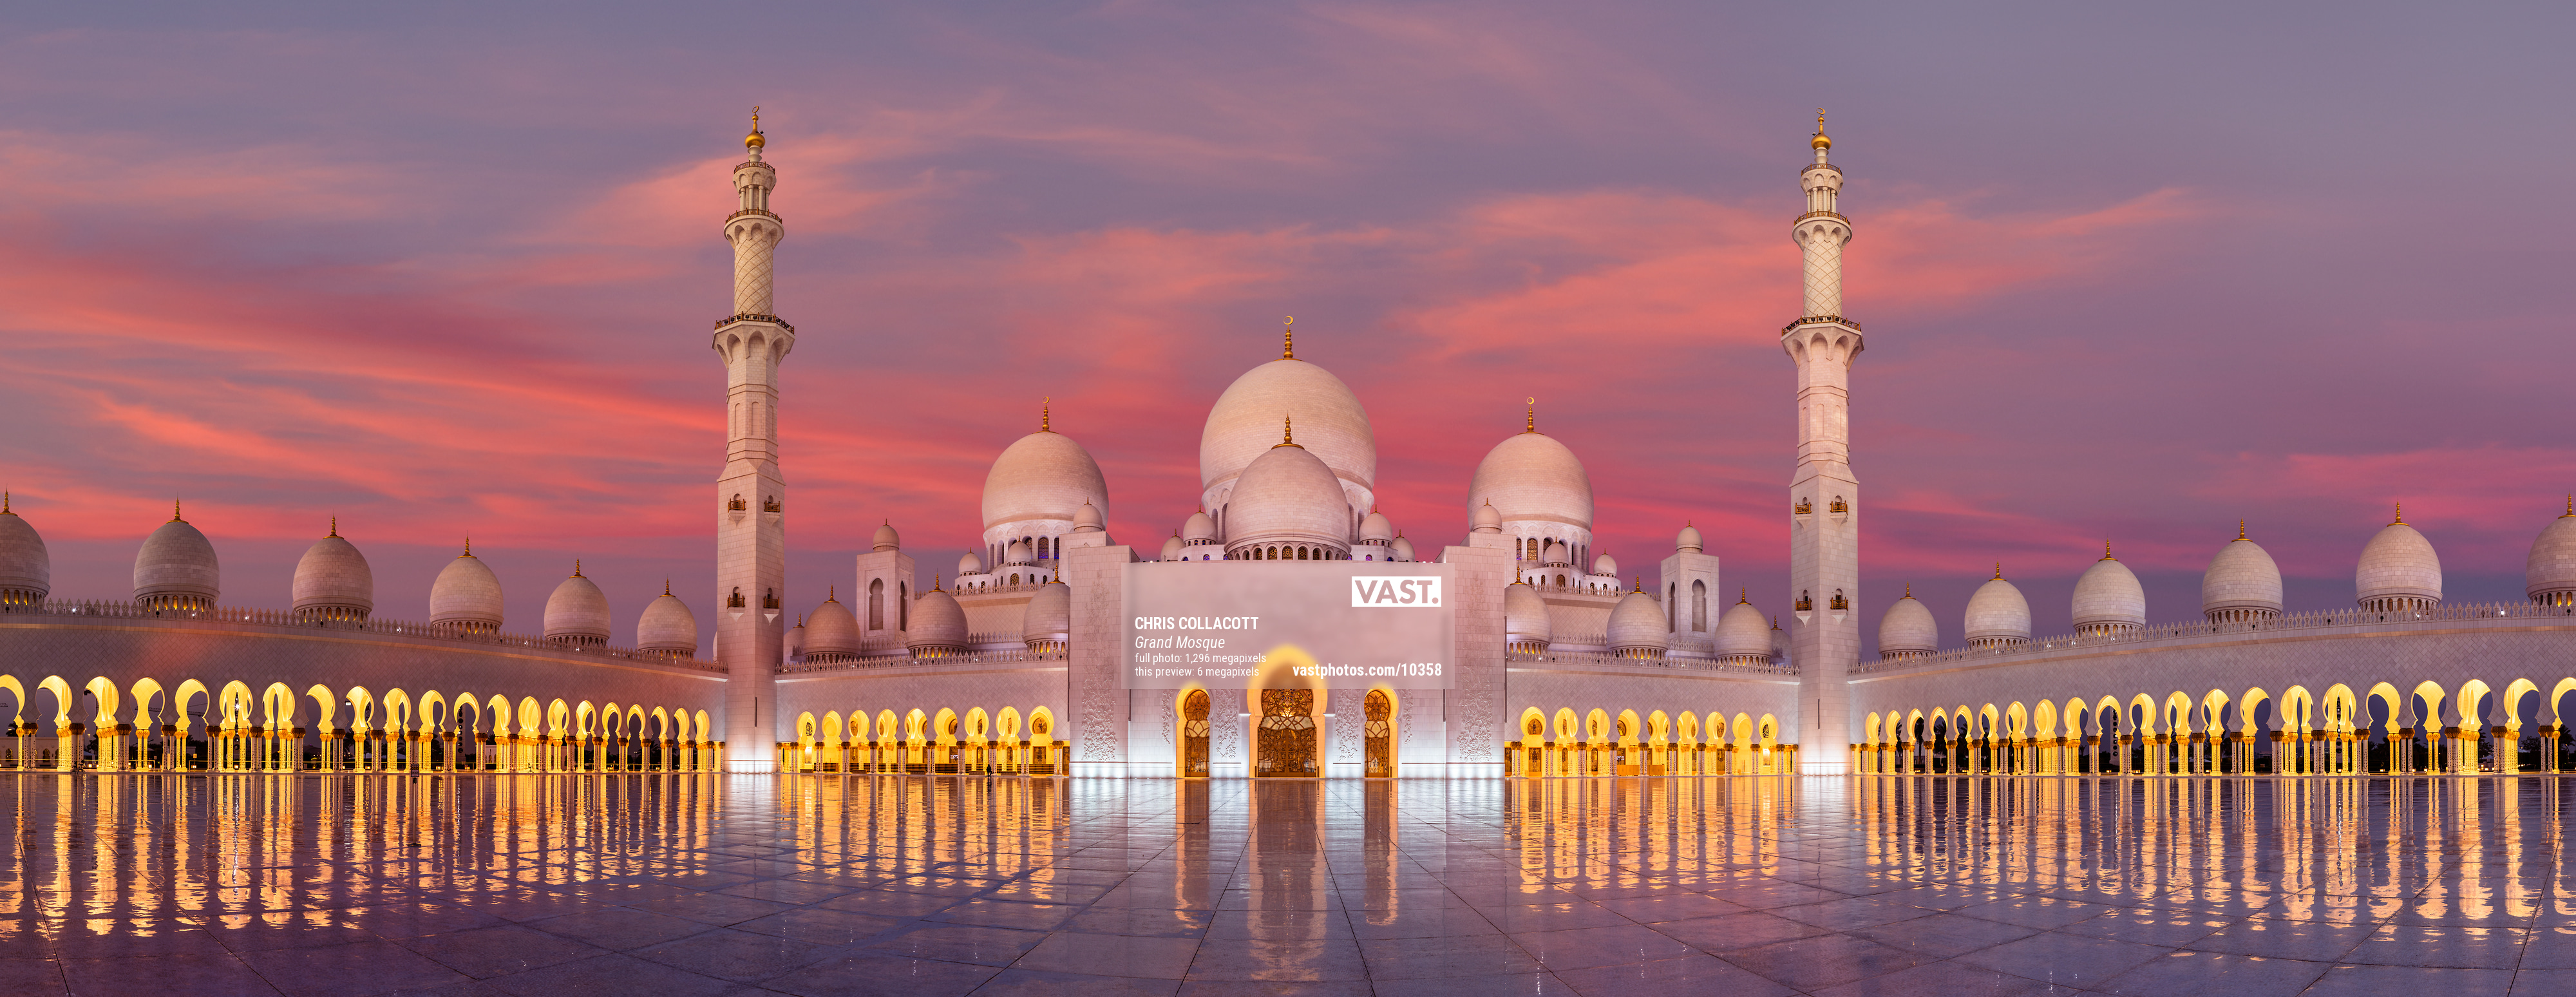 Photos of Mosques: High Resolution Prints - VAST